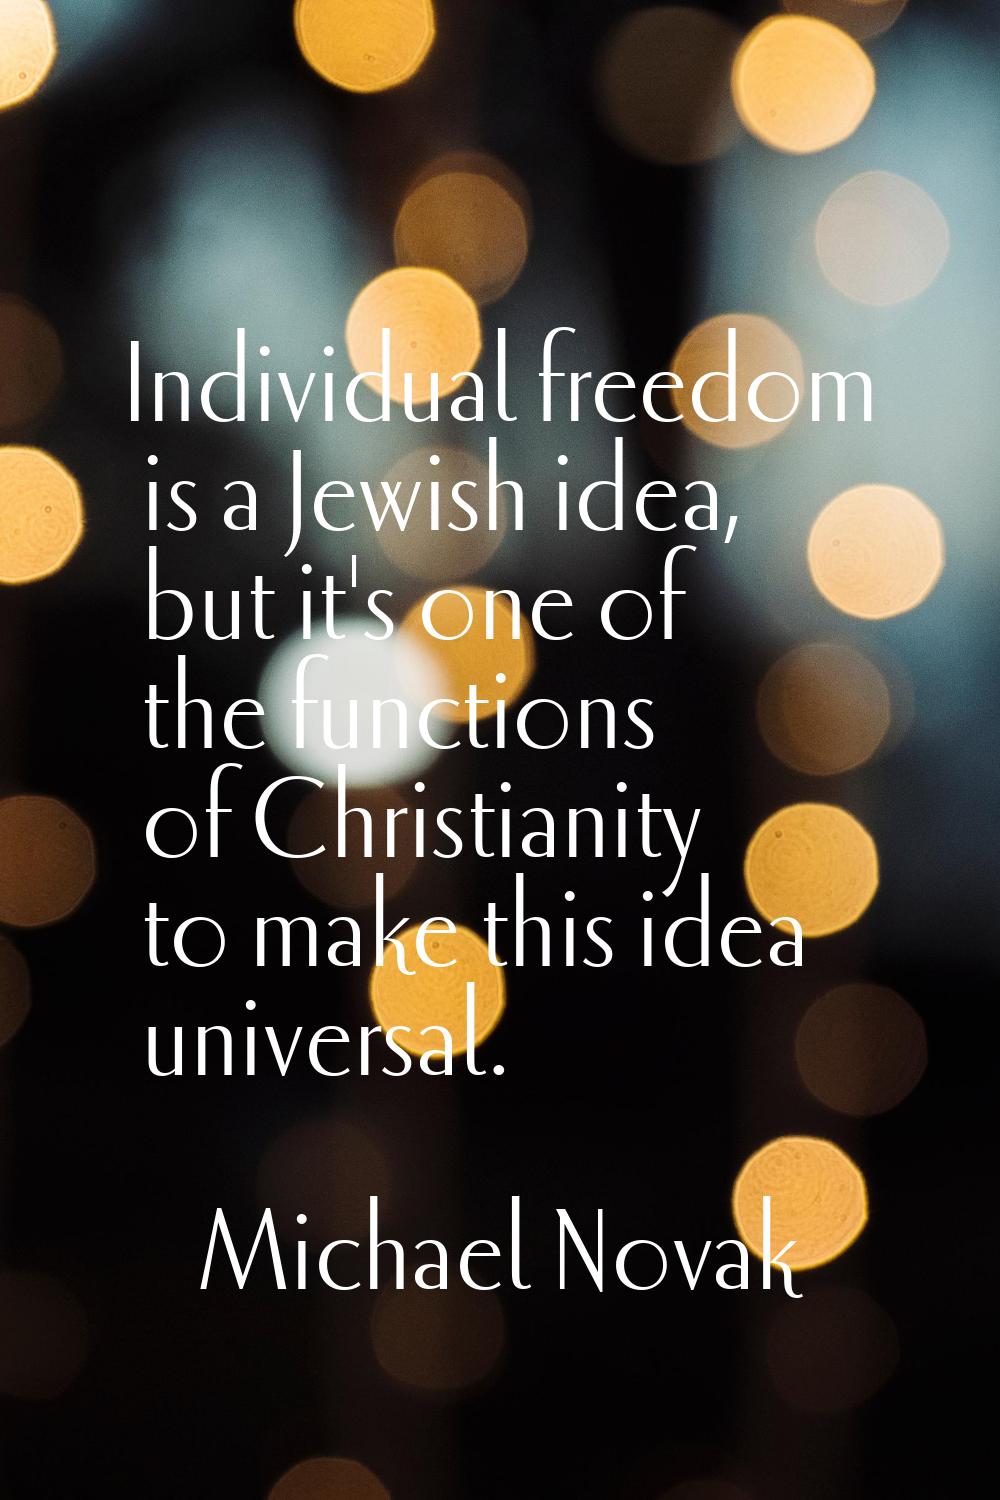 Individual freedom is a Jewish idea, but it's one of the functions of Christianity to make this ide